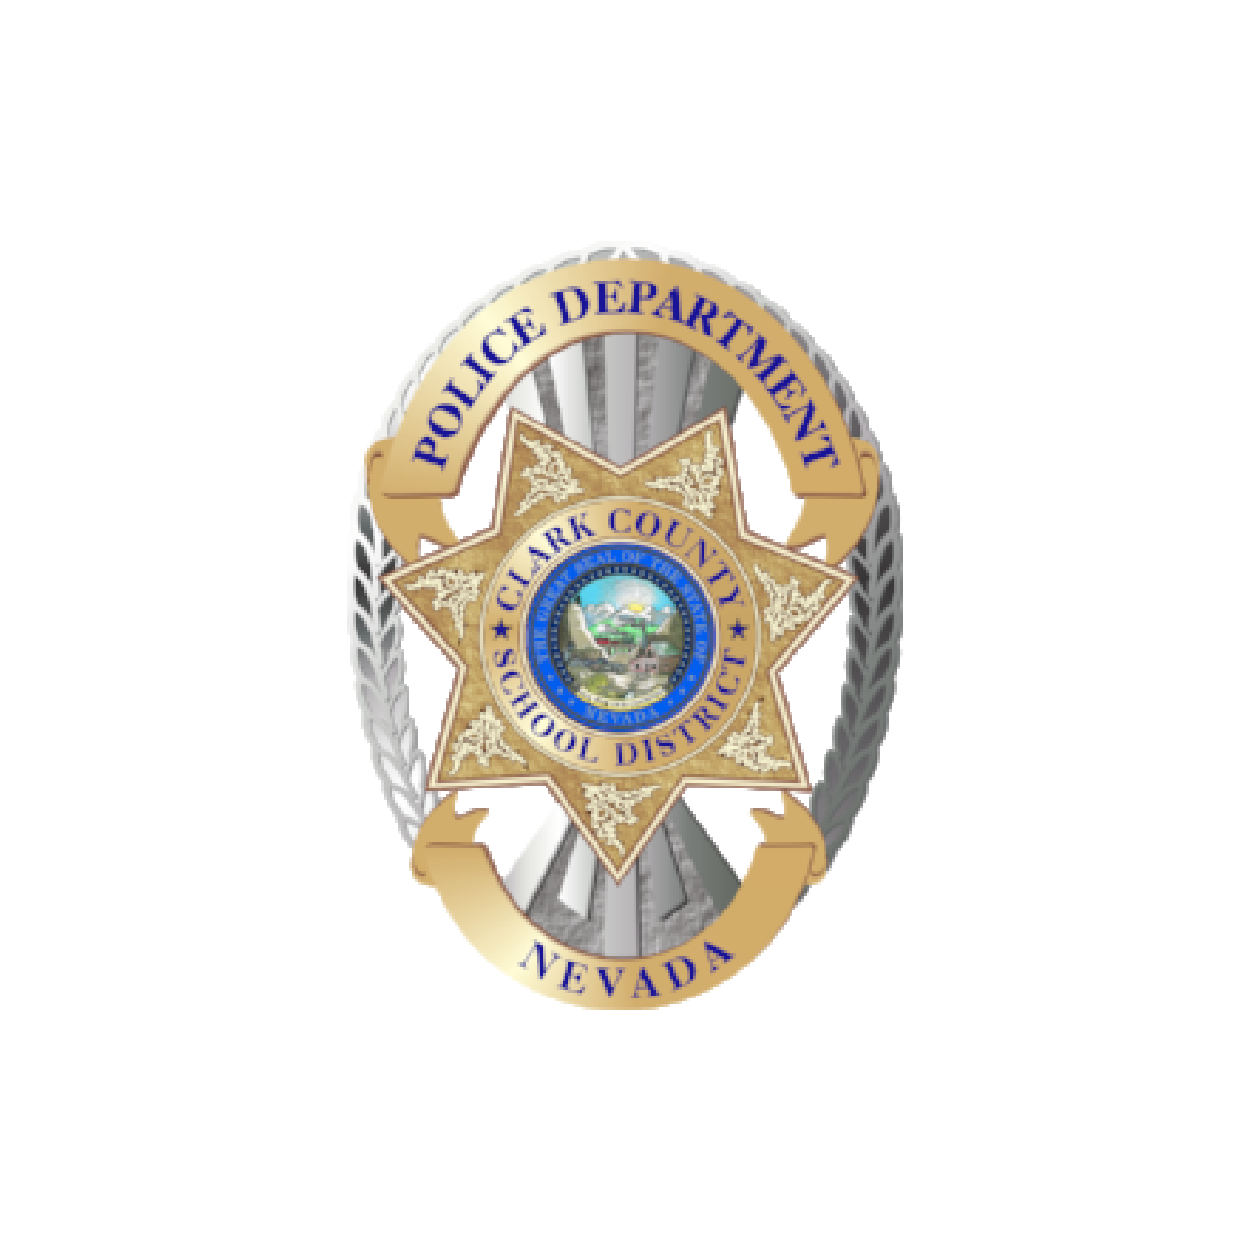 police-logo_clark county.png